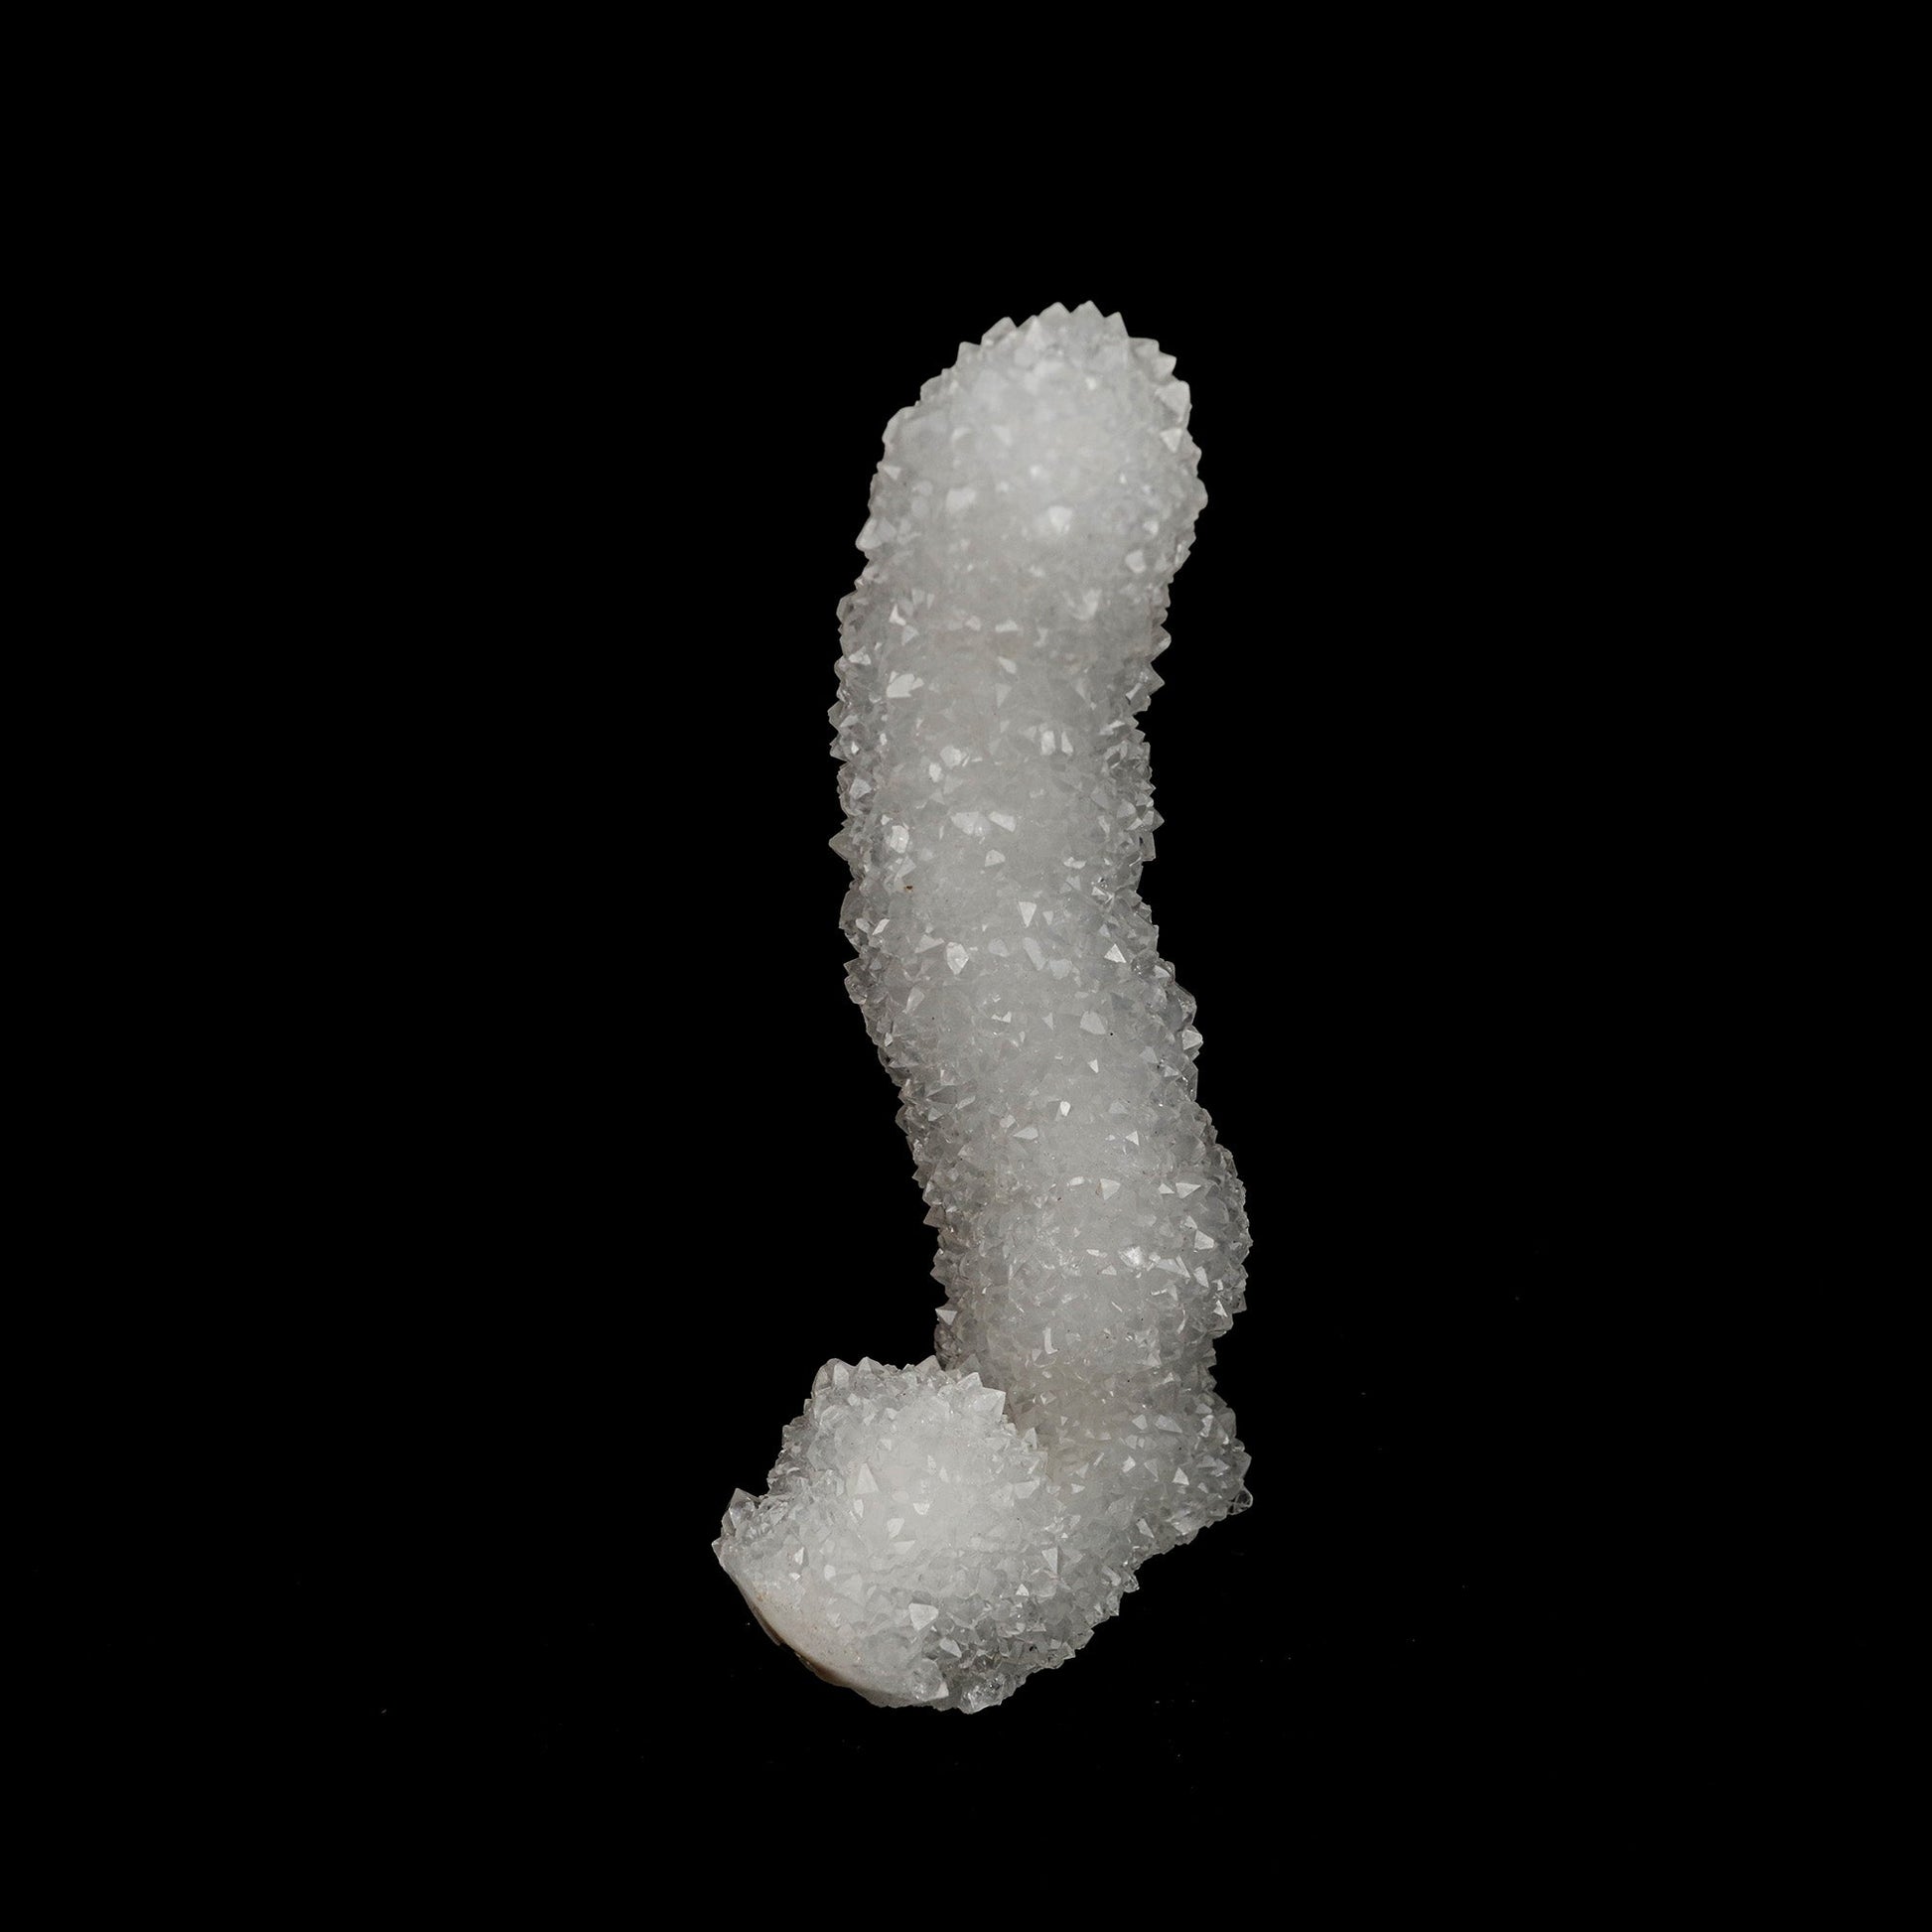 MM Quartz Stalactite Natural Mineral Specimen # B 5271  https://www.superbminerals.us/products/mm-quartz-stalactite-natural-mineral-specimen-b-5271  Features: Natural manufactured MM Quartz Stalactite from Nashik, India.This sculpture is self-standing and will look amazing in any collection, exhibition, or alter. Primary Mineral(s): MM Quartz Secondary Mineral(s): N/AMatrix: N/A 6 Inch x 3 InchWeight : 302 GmsLocality: Nashik, Maharashtra, India